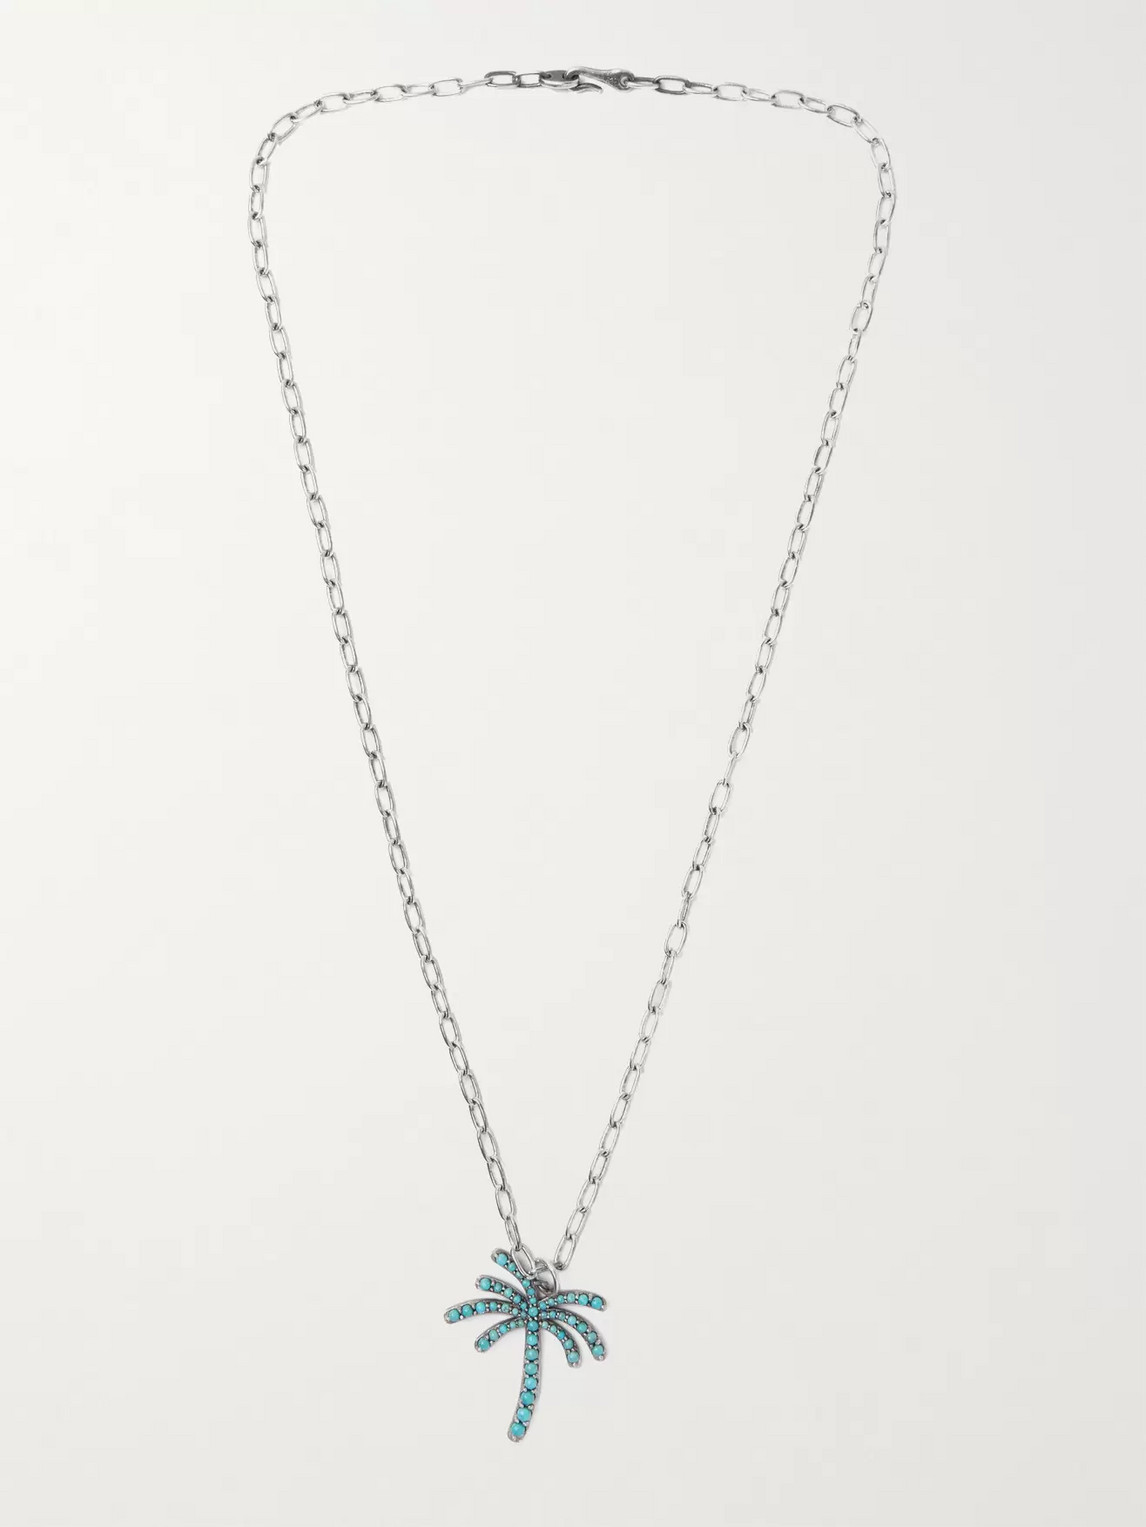 Mcohen Sterling Silver And Turquoise Necklace